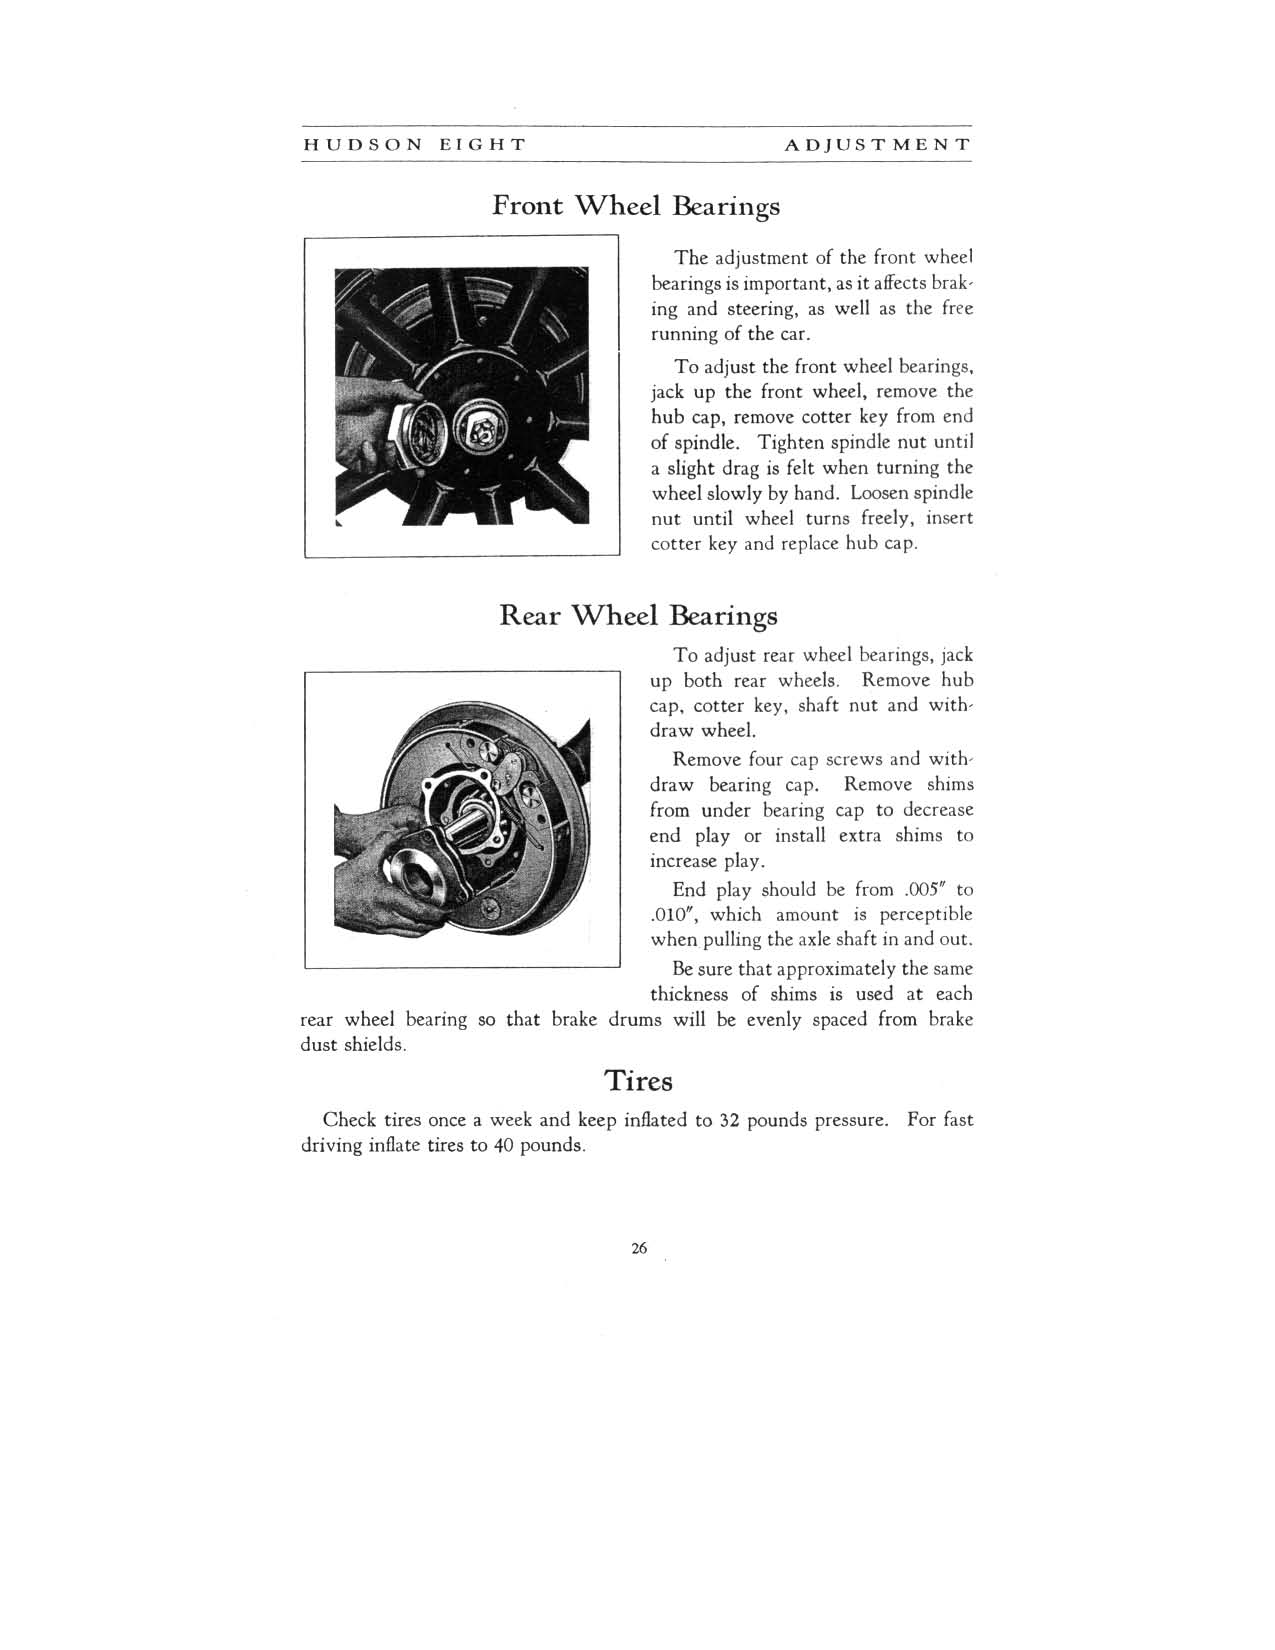 1931 Hudson 8 Instruction Book Page 6